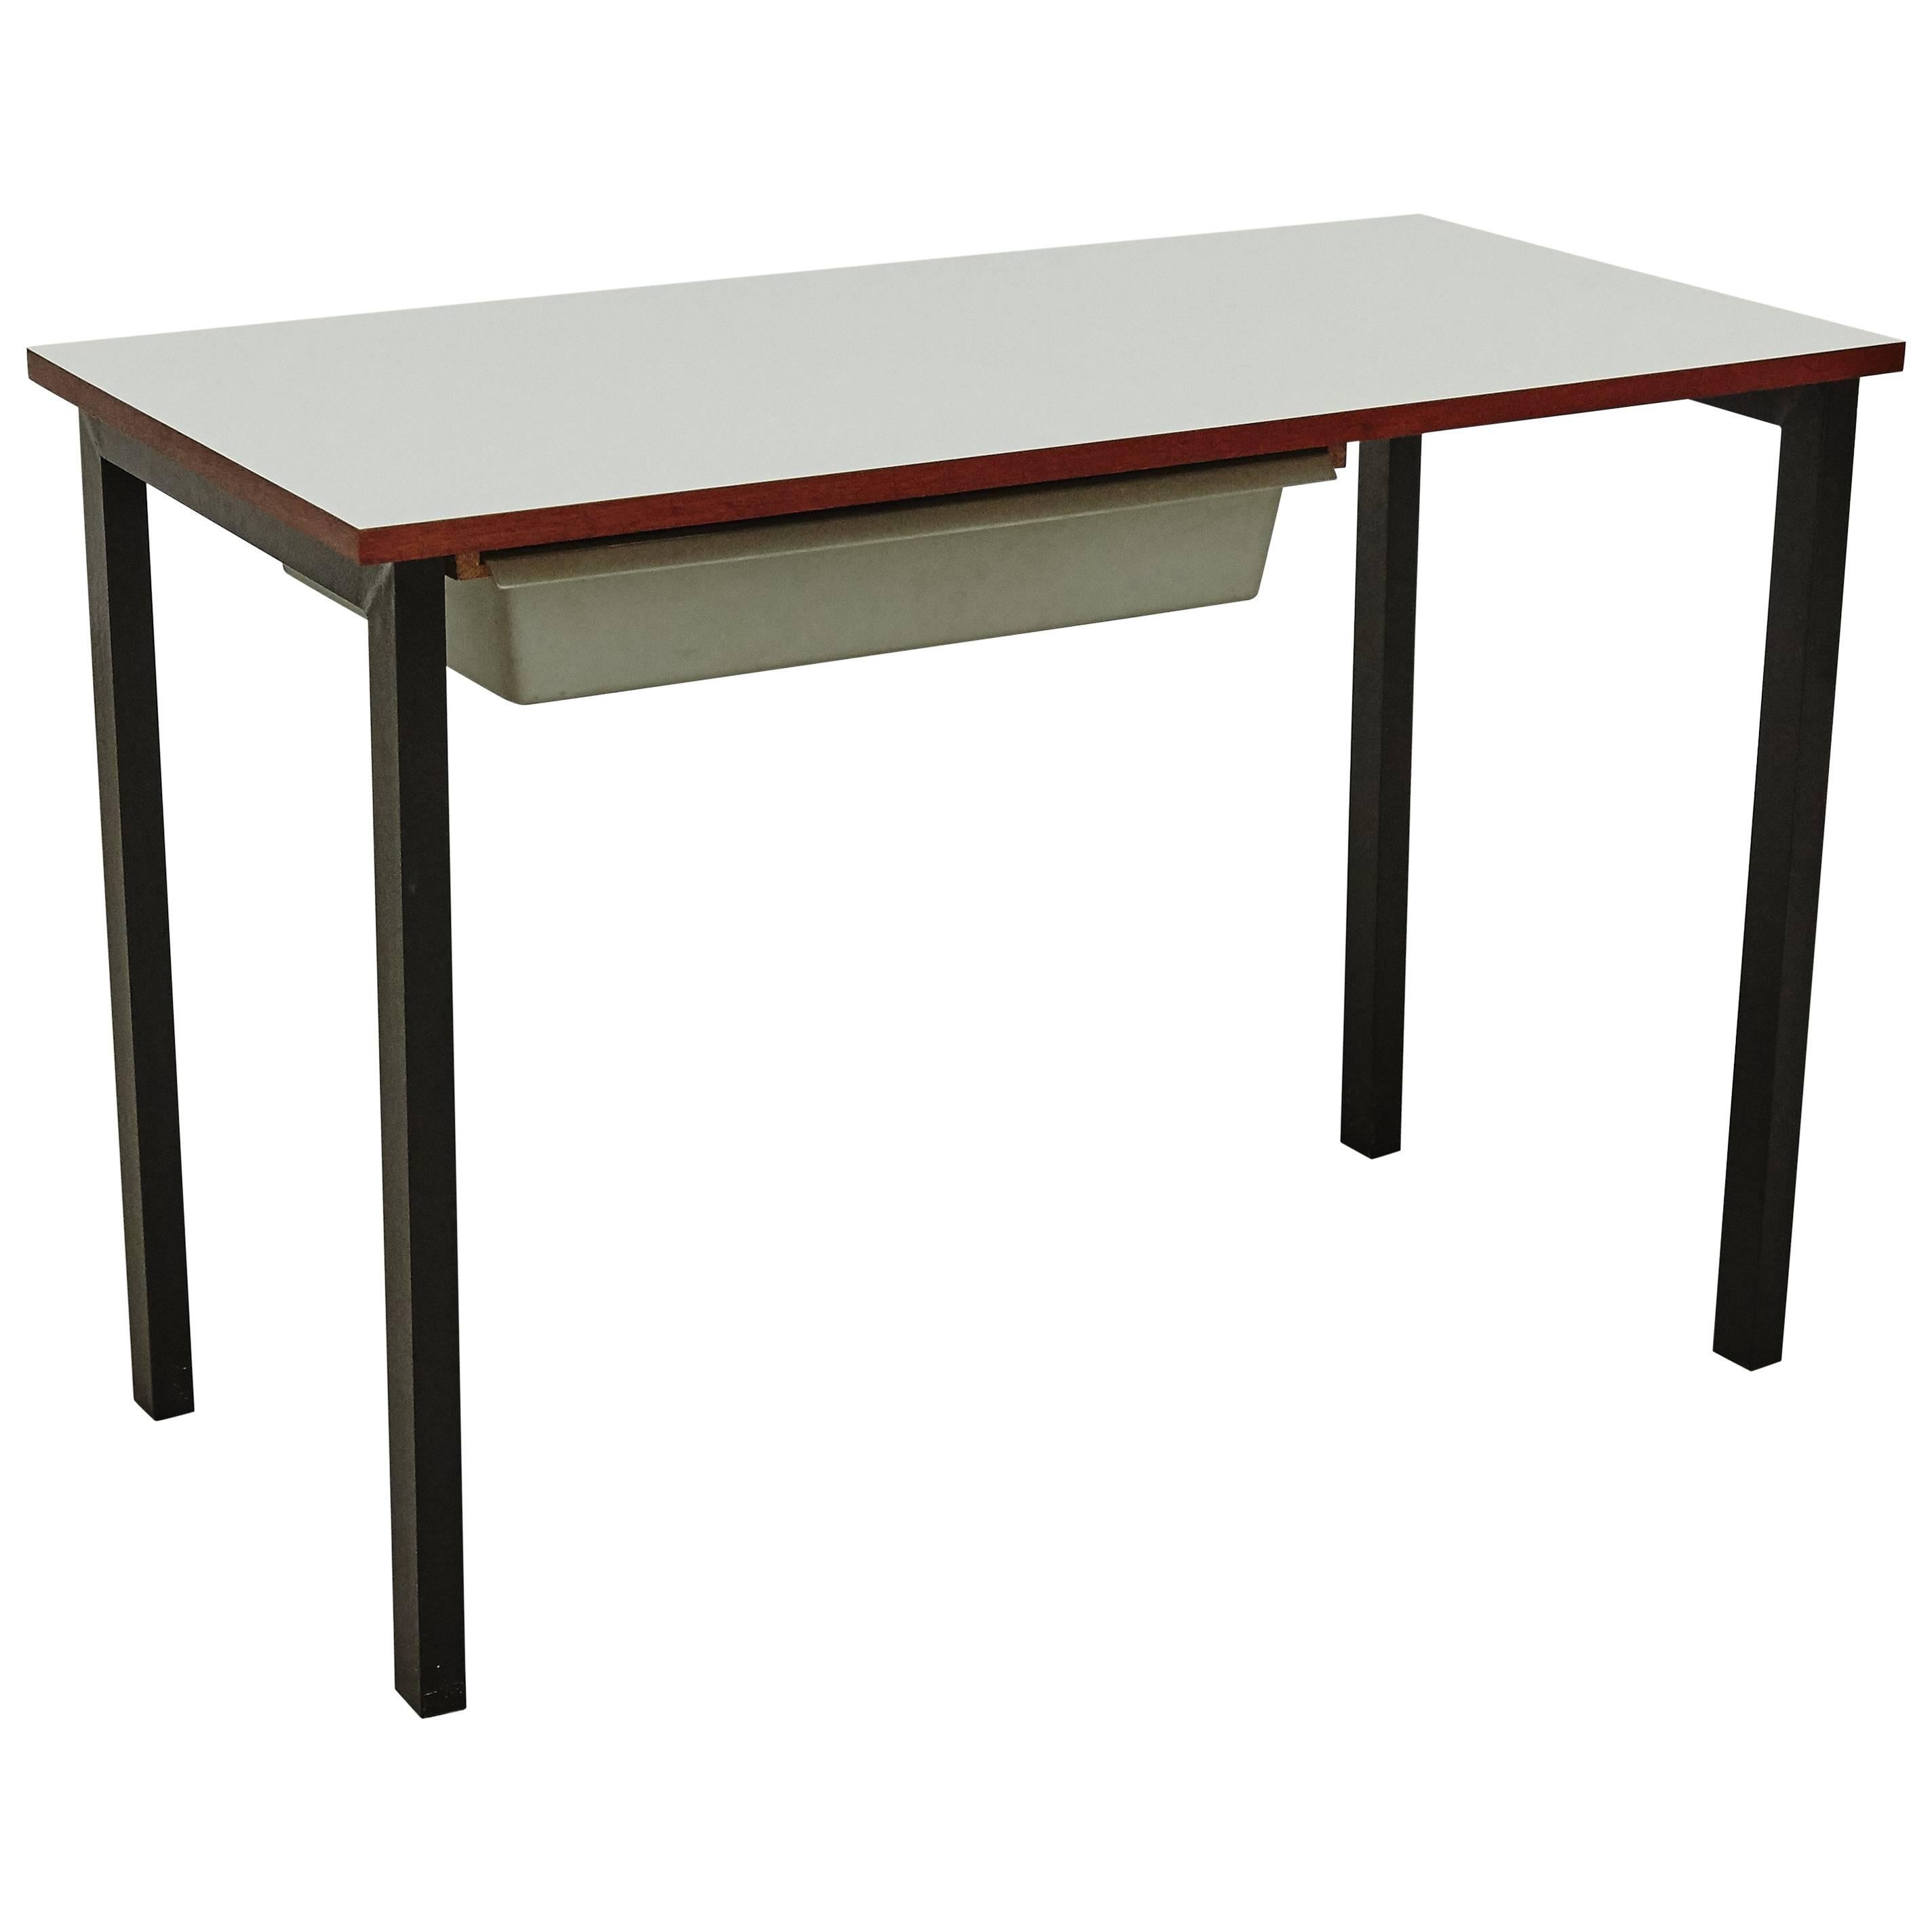 Mid-20th Century Console with Drawer Cite Cansado, circa 1950 by Charlotte Perriand